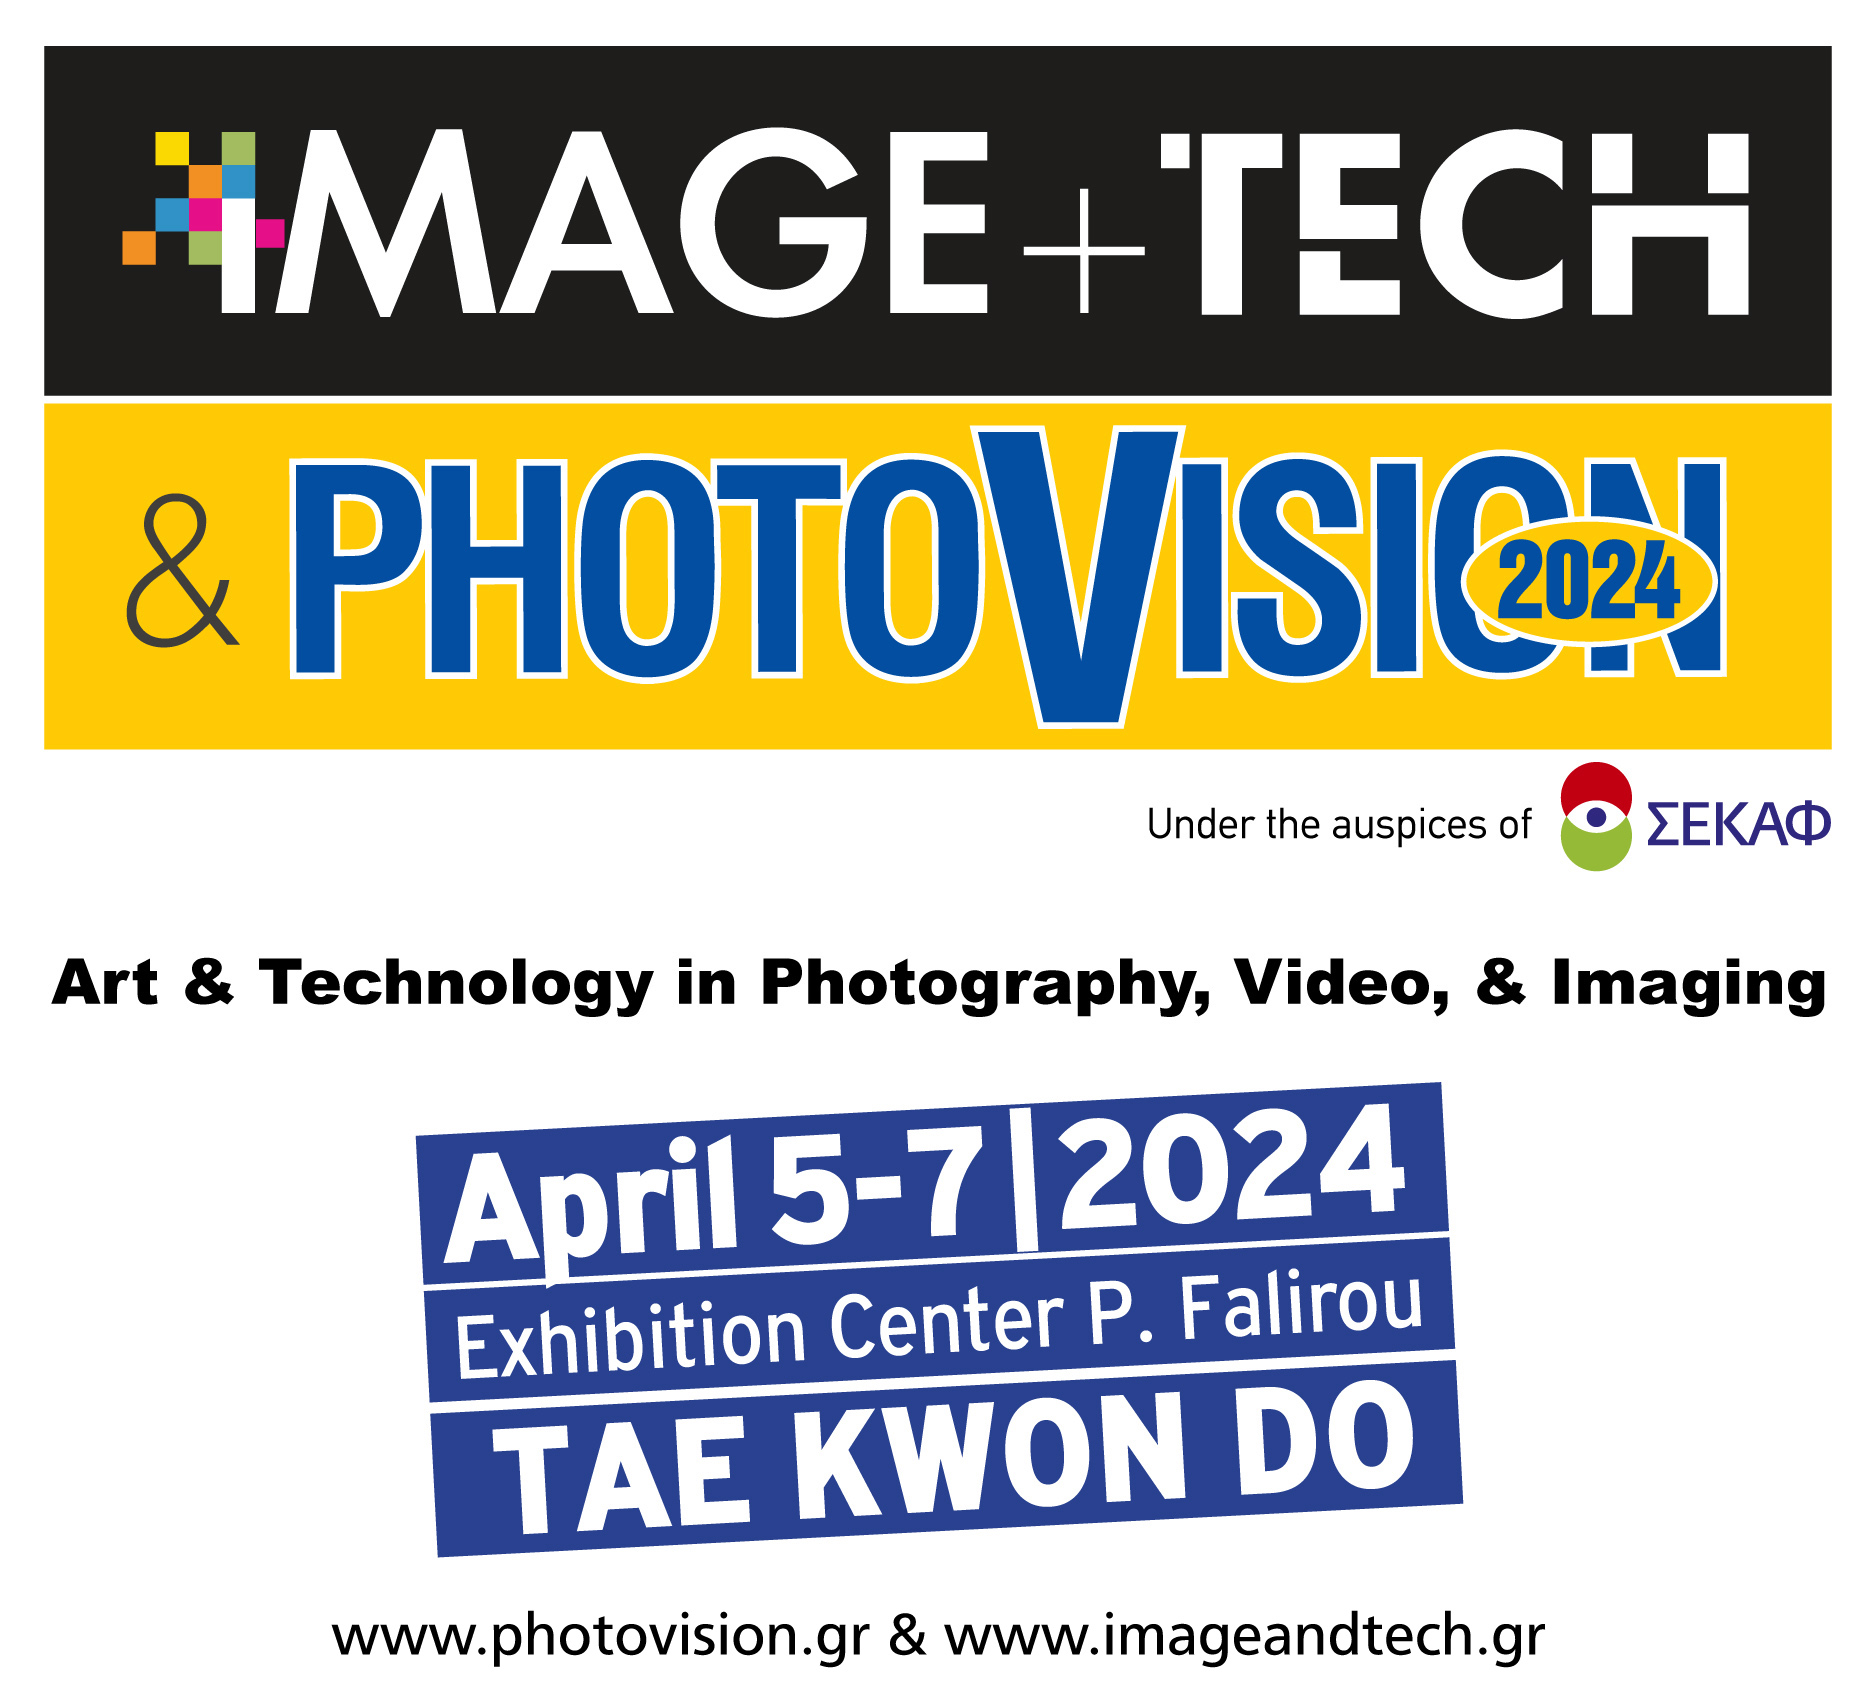 image and tech photovision 2024